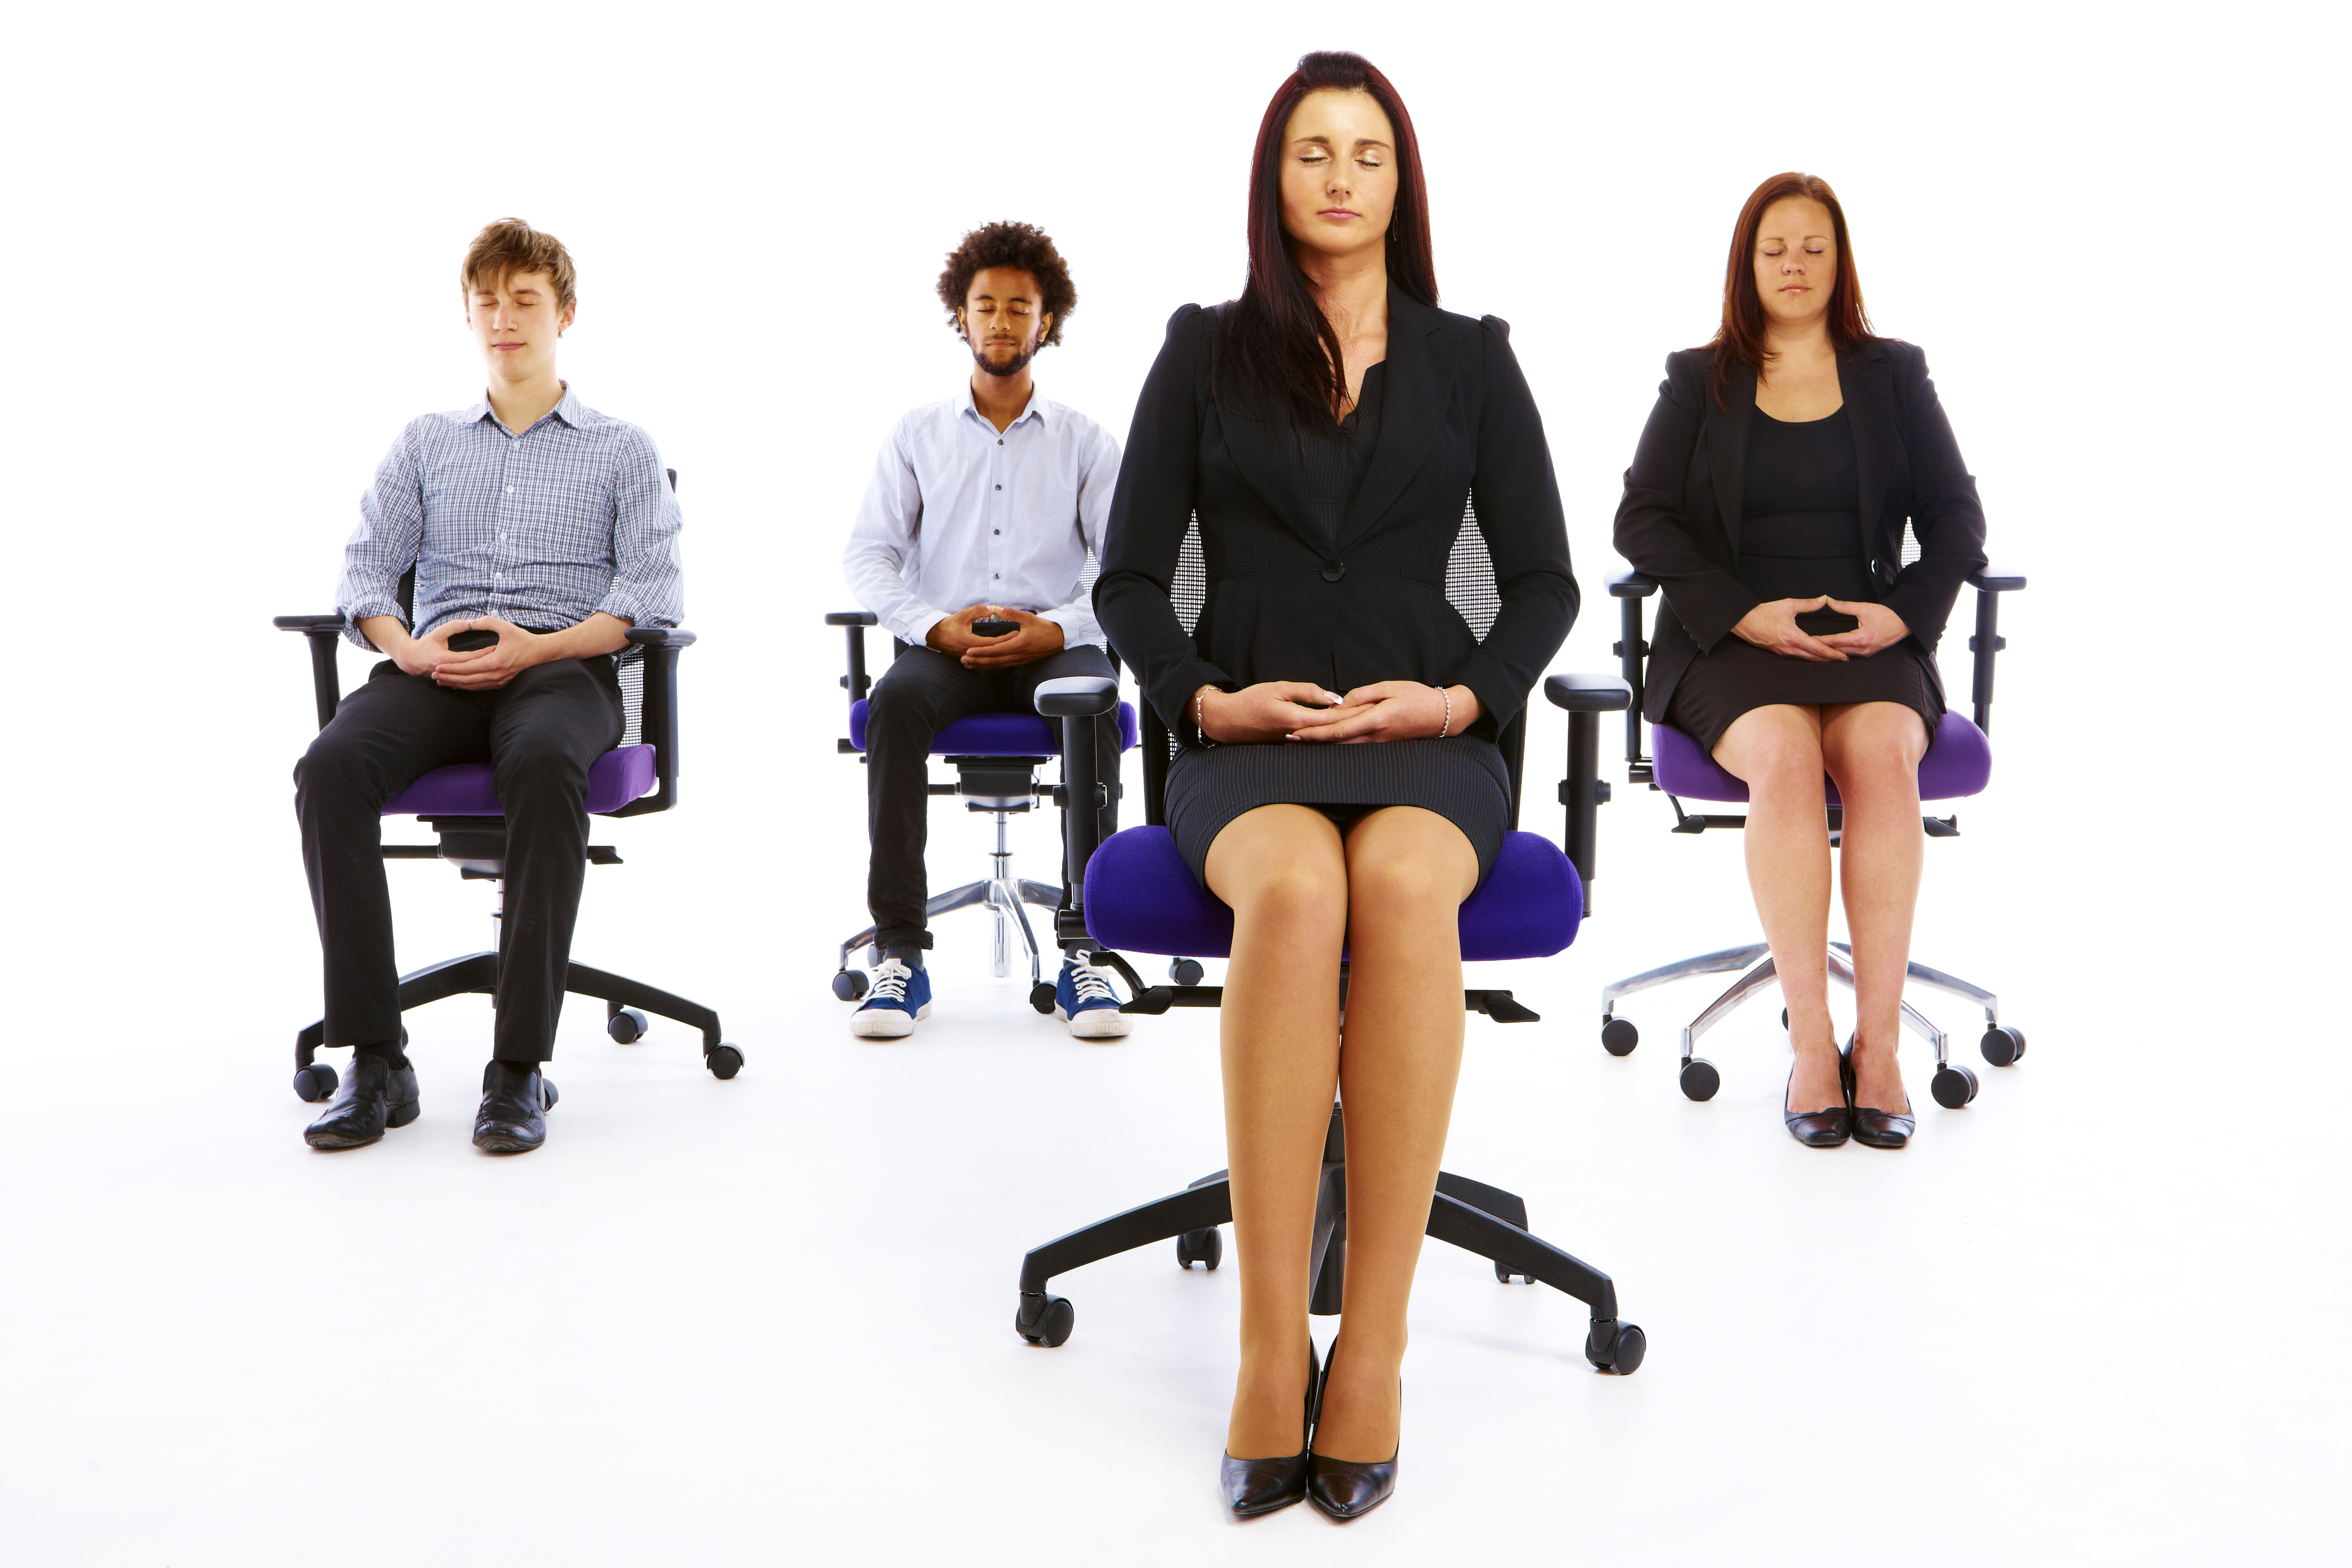 iStock sitting on office chairs